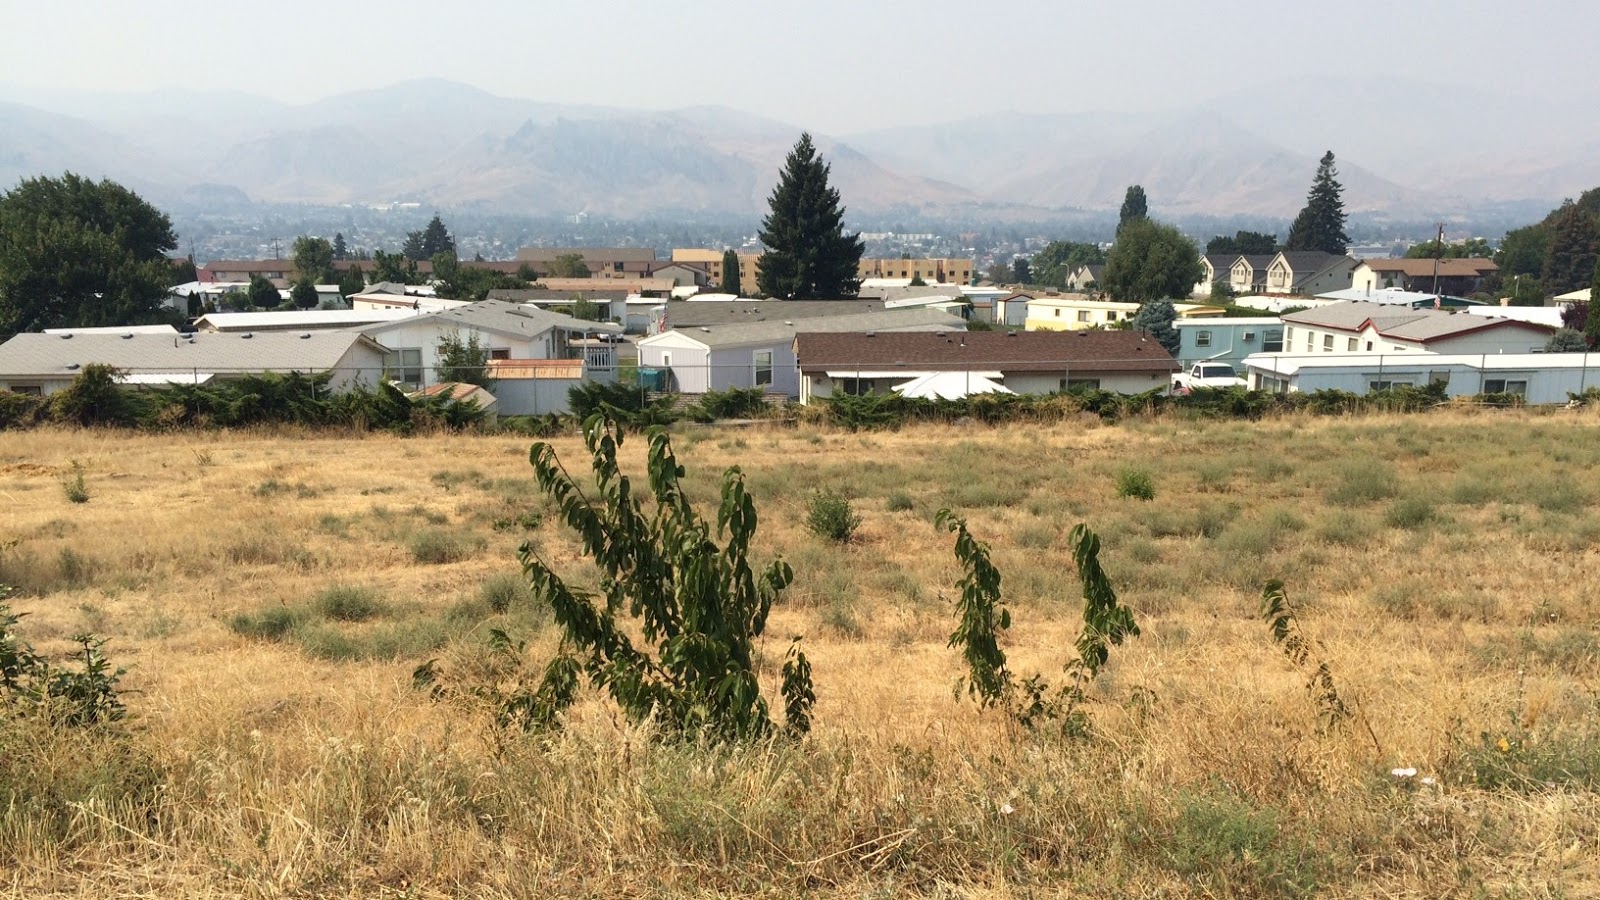 A view from 9th Street Park of the Wenatchee valley and a neighboring manufactured home park